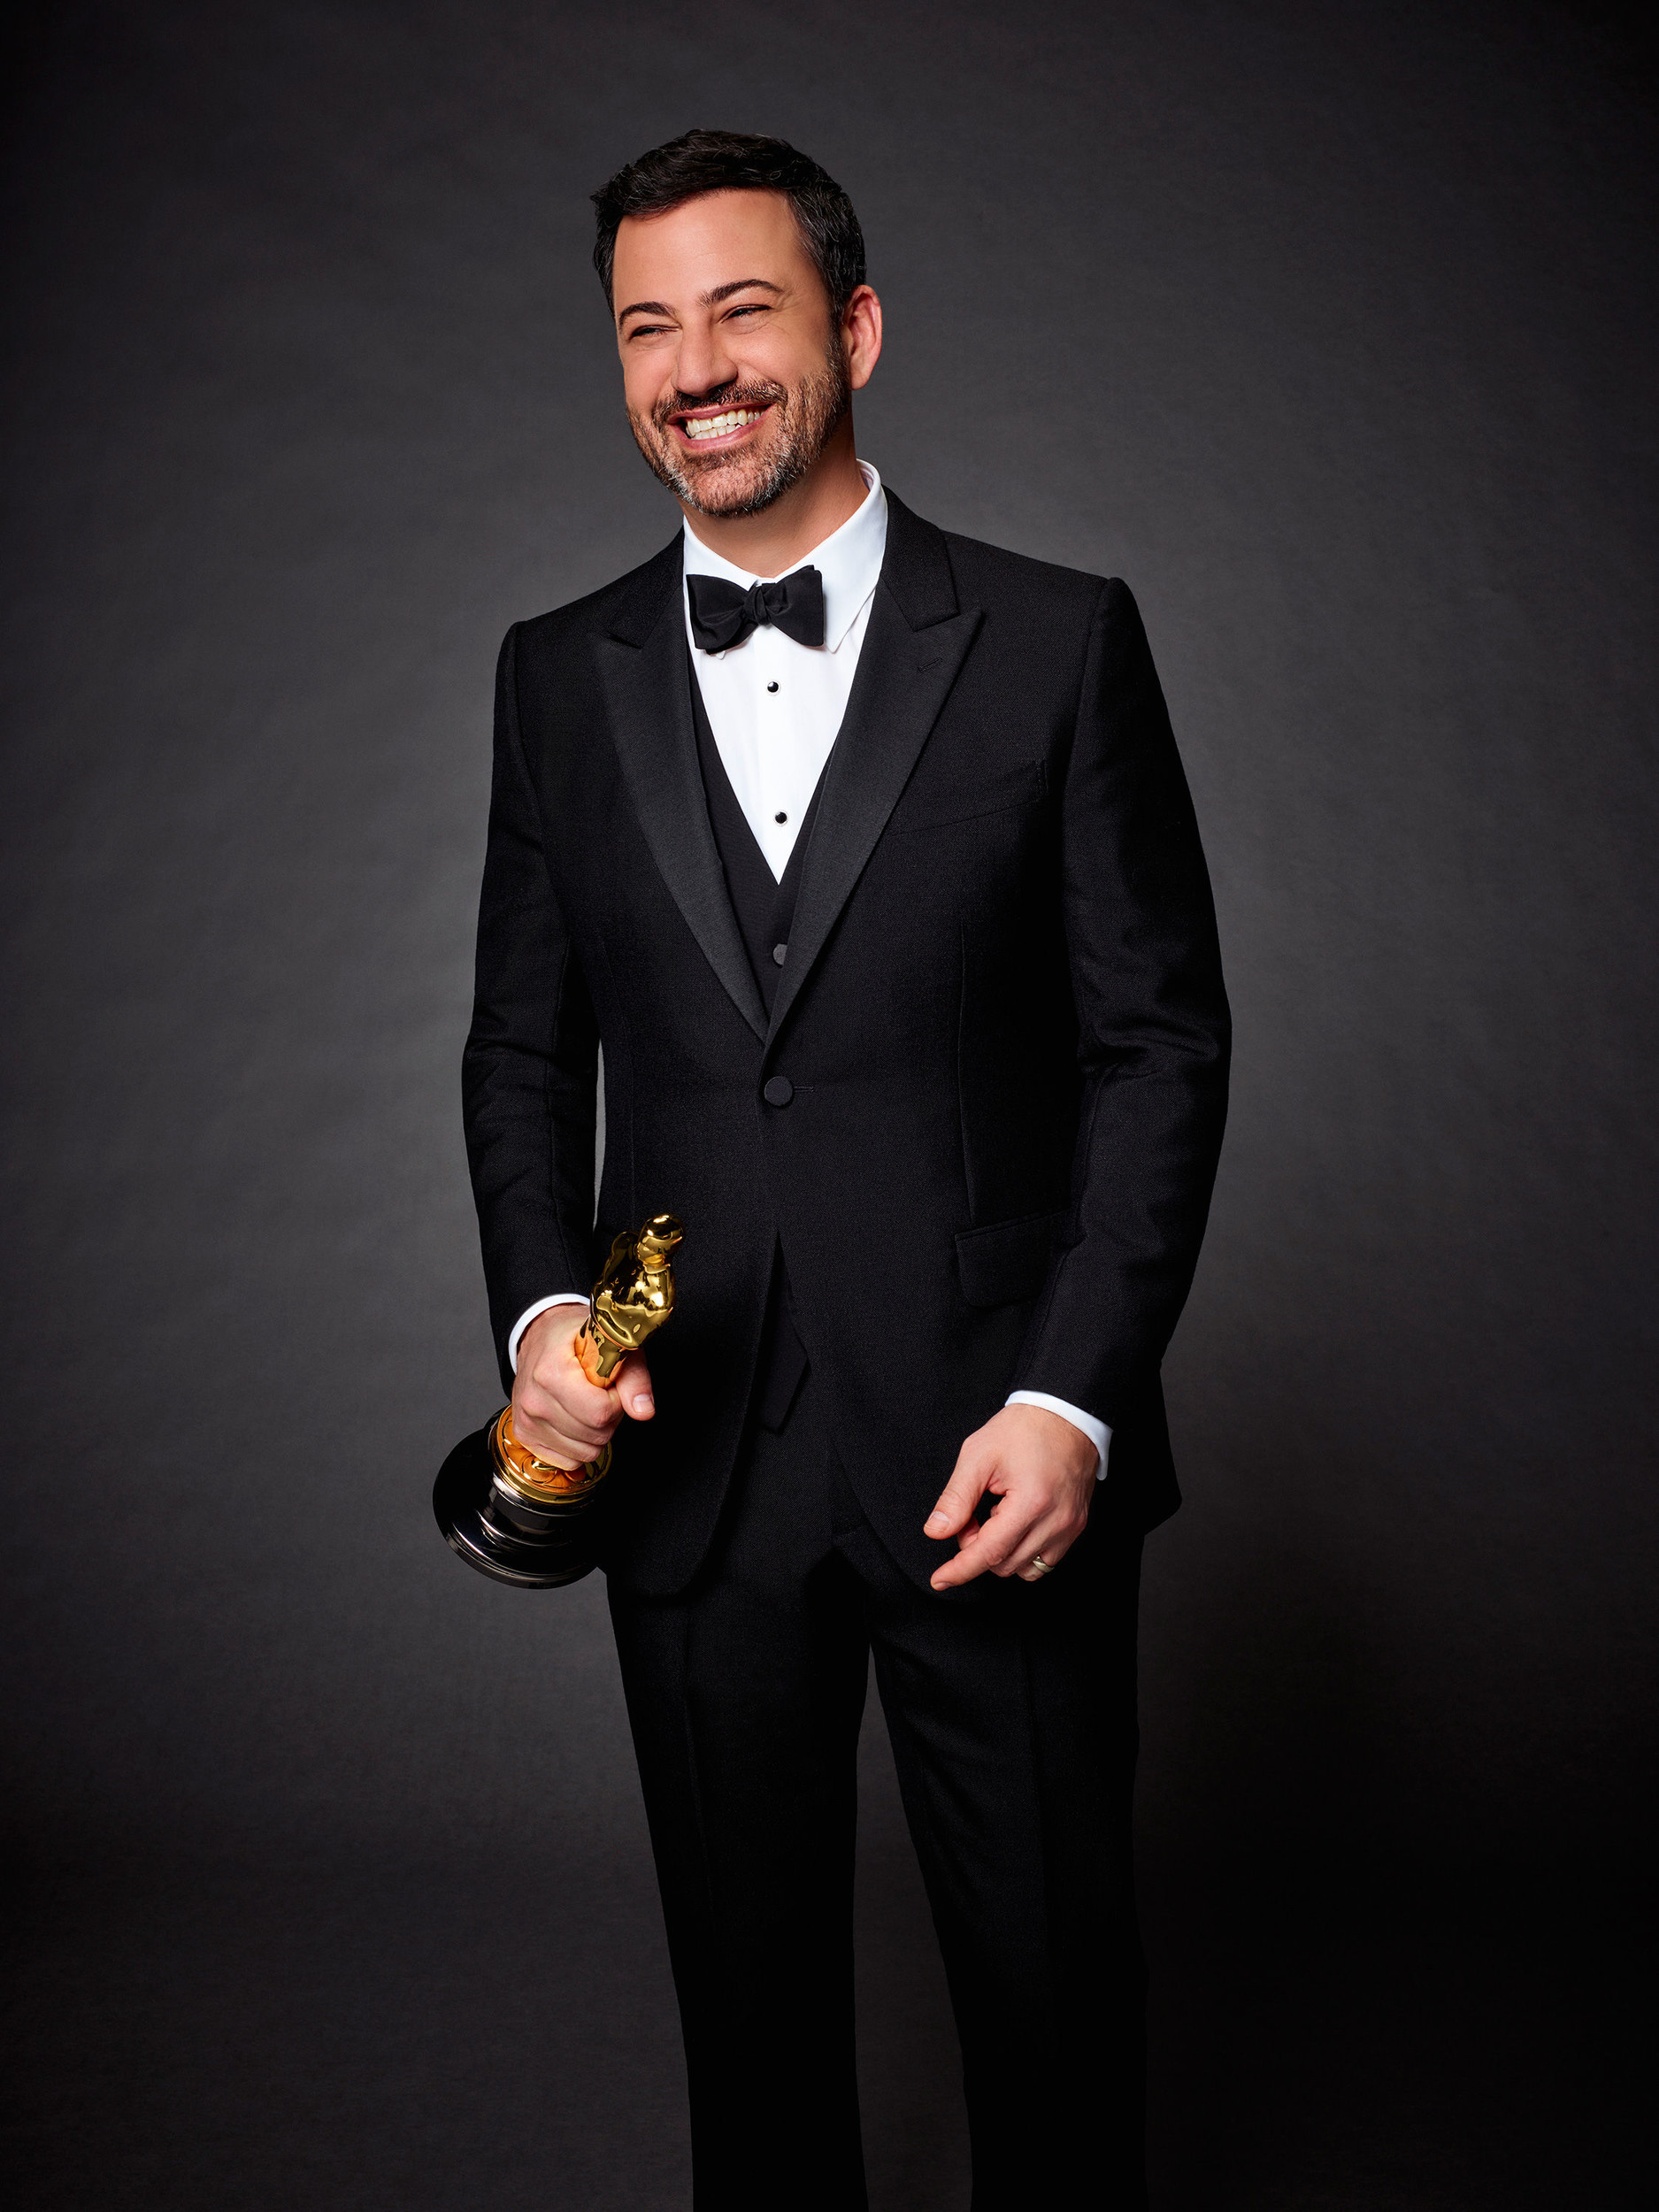 It’s Jimmy Kimmel’s turn to make his way into the Oscar spotlight as host of this year’s awards telecast, with Hollywood and TV audiences wondering if Kimmel and Matt Damon’s  long-running “feud” will carry over to Oscar night.